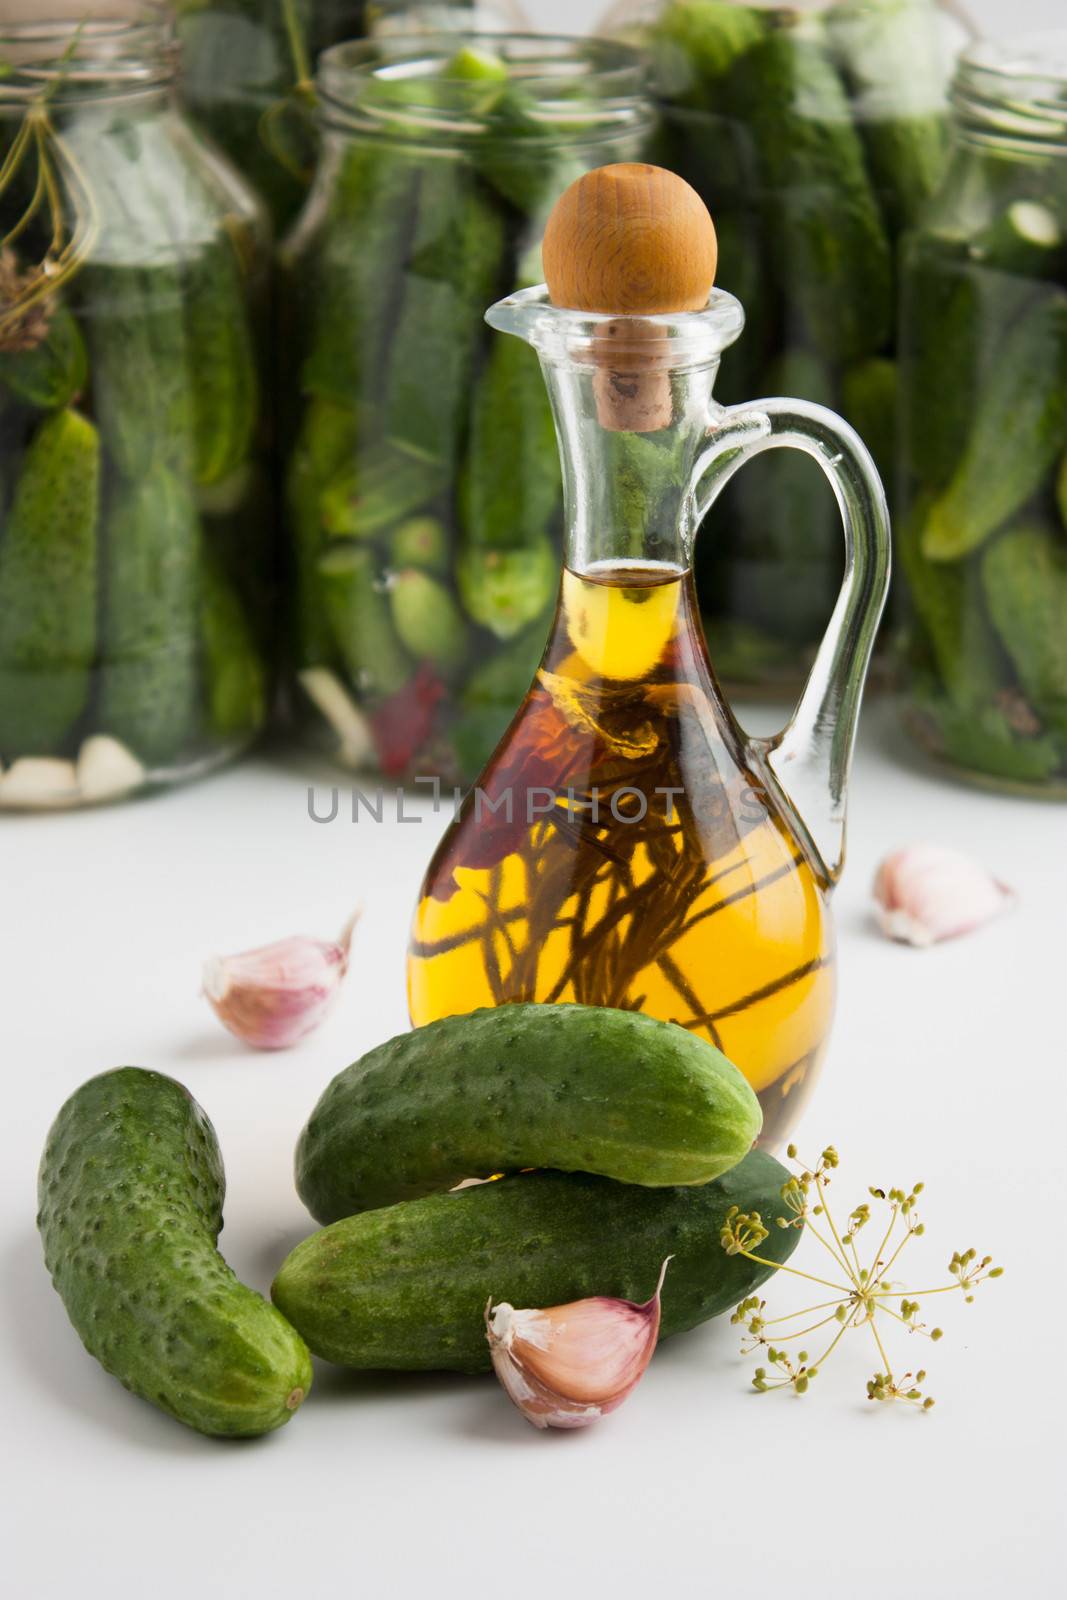 harvesting and canning cucumbers by oleg_zhukov